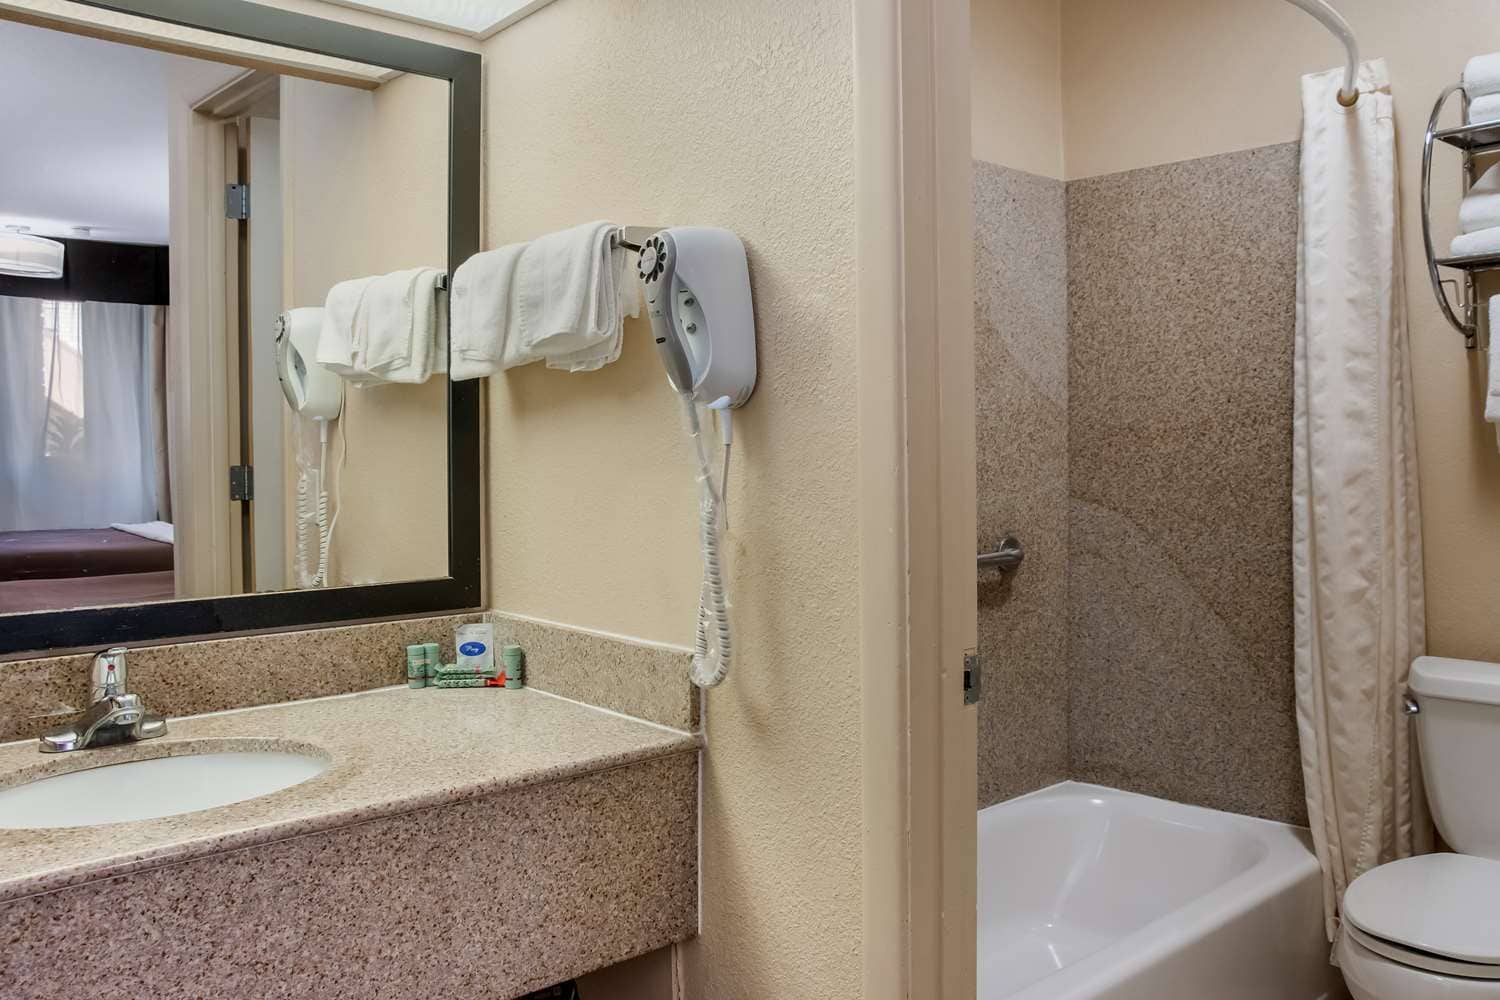 Don't Steal That Fluffy Towel: Hotels May Be Tracking You With a